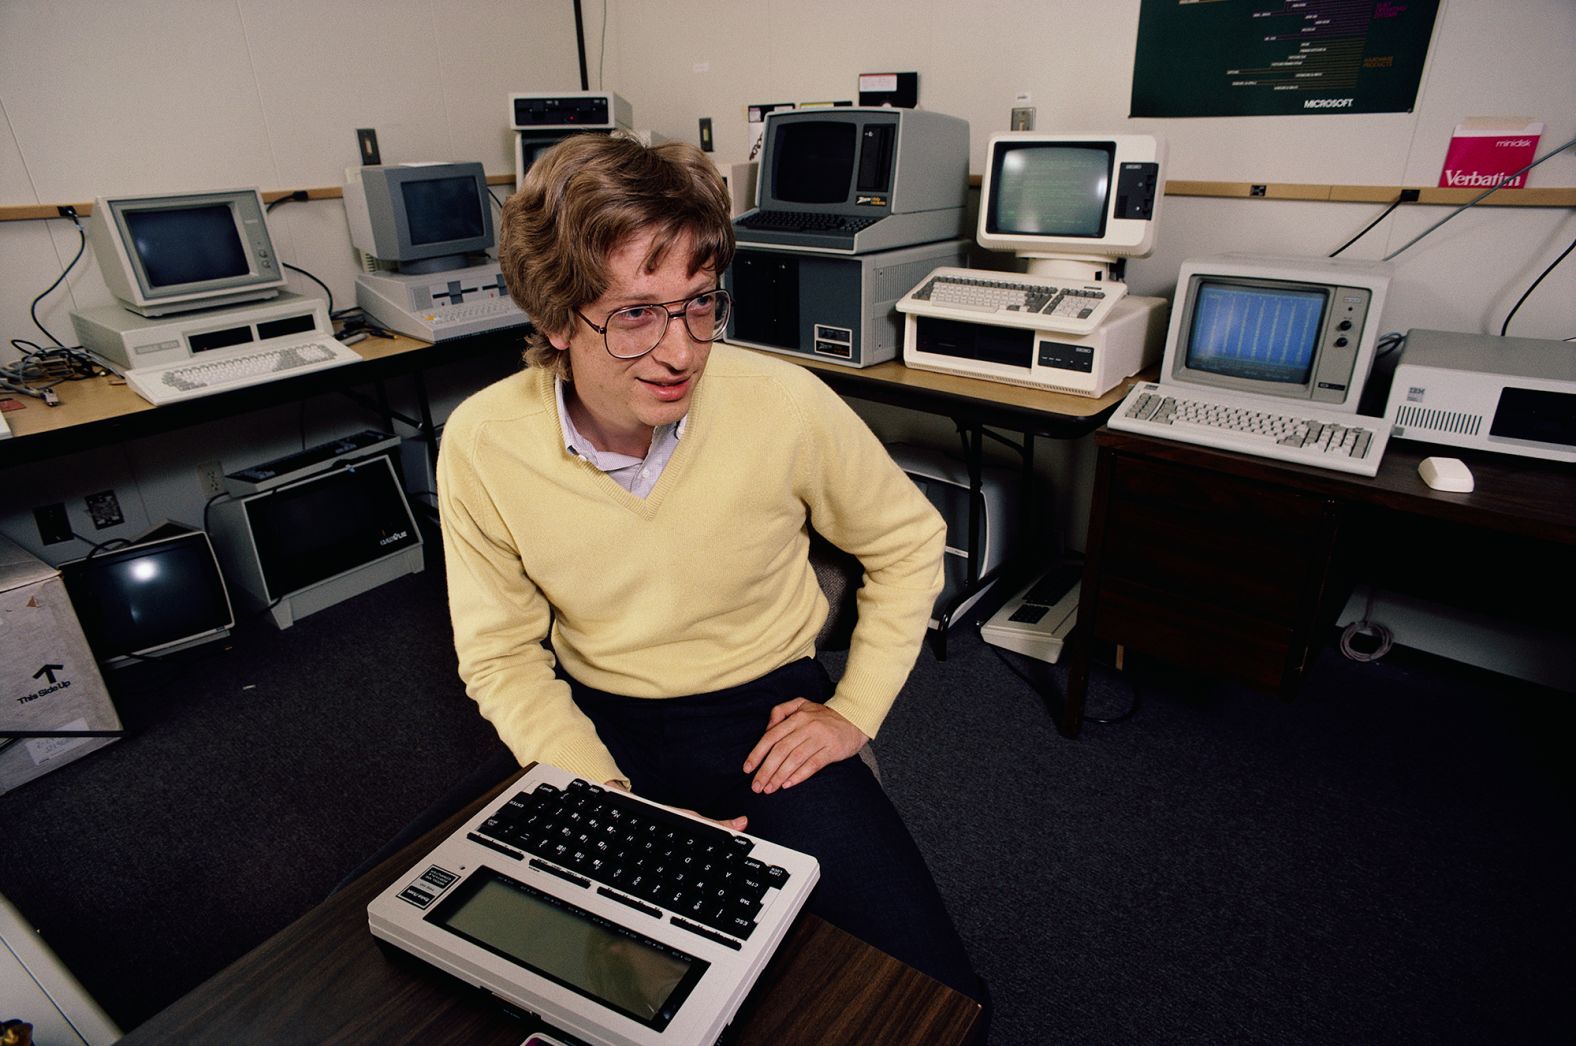 Gates, seen here in 1983, began programming computers at age 13. He dropped out of Harvard in 1975 and co-founded Microsoft with Paul Allen.